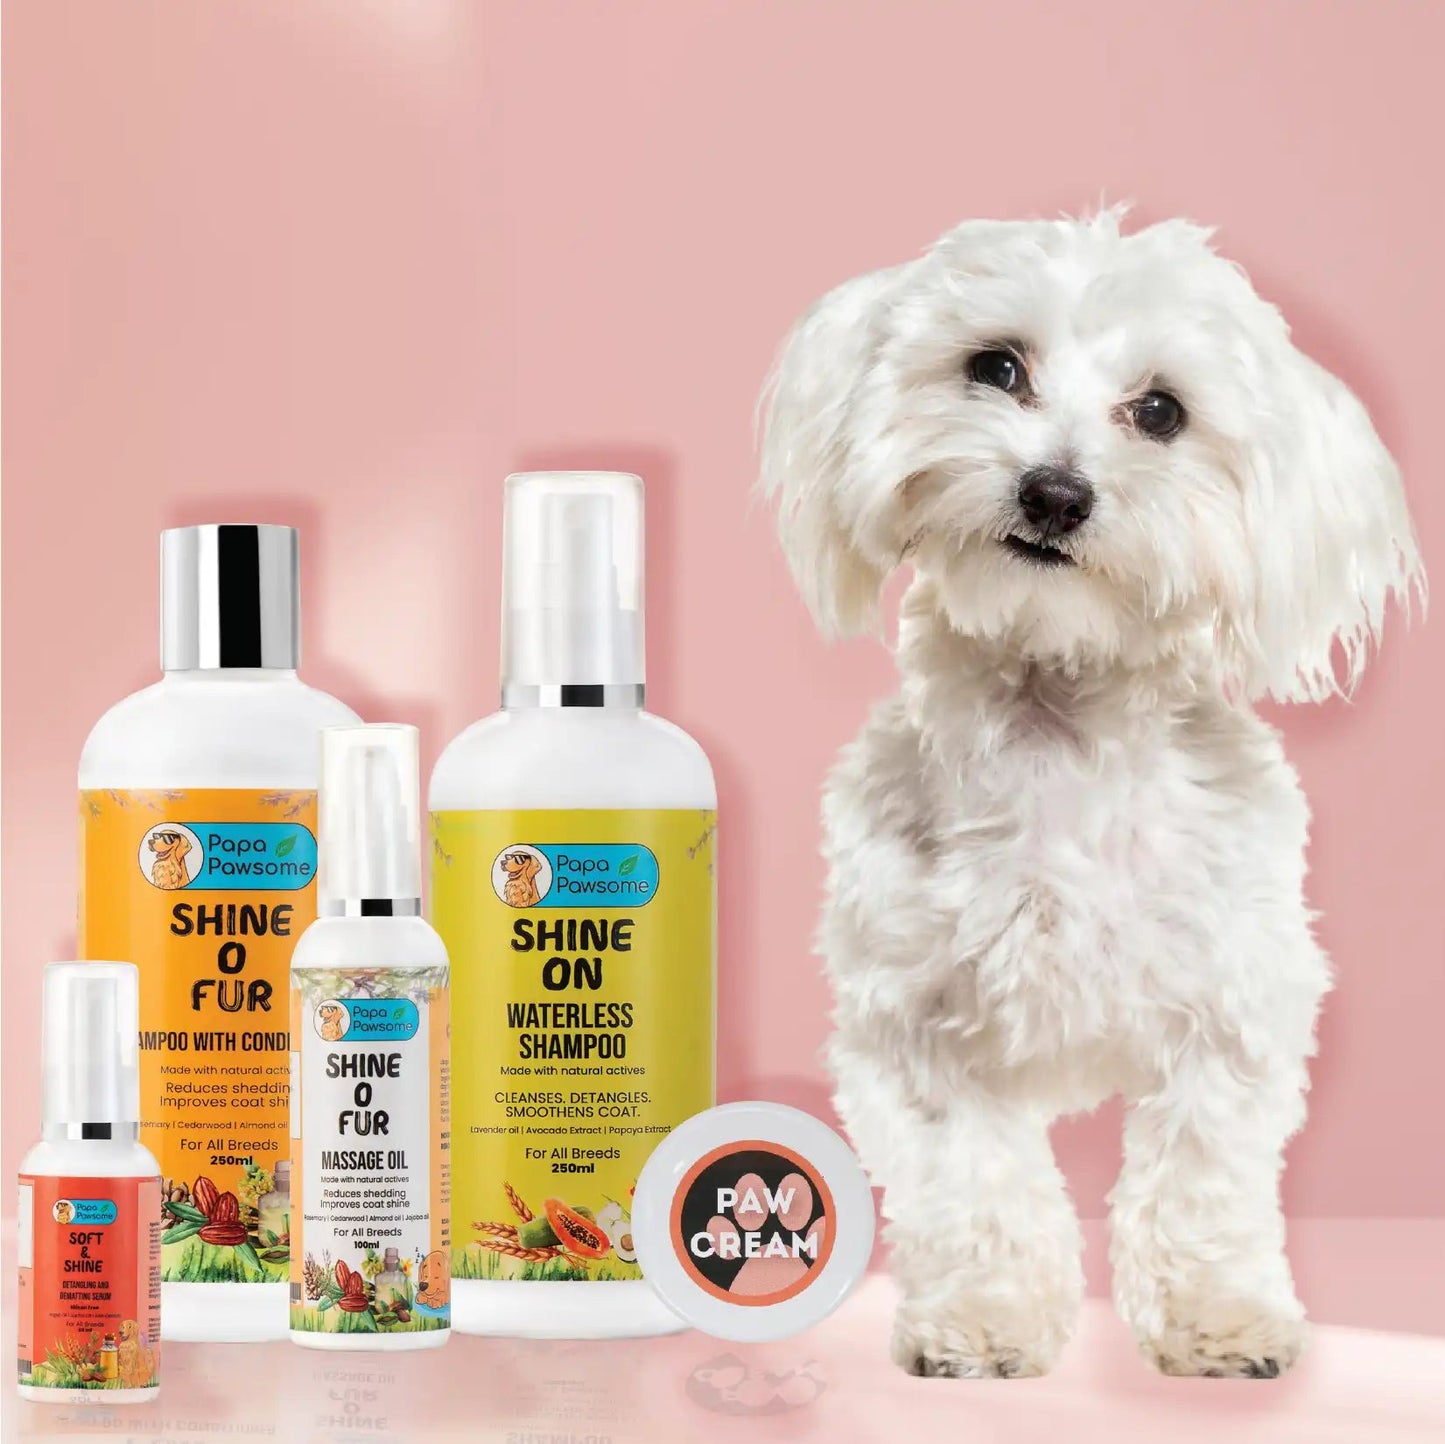 Maltese Complete Grooming kit - Papa Pawsome